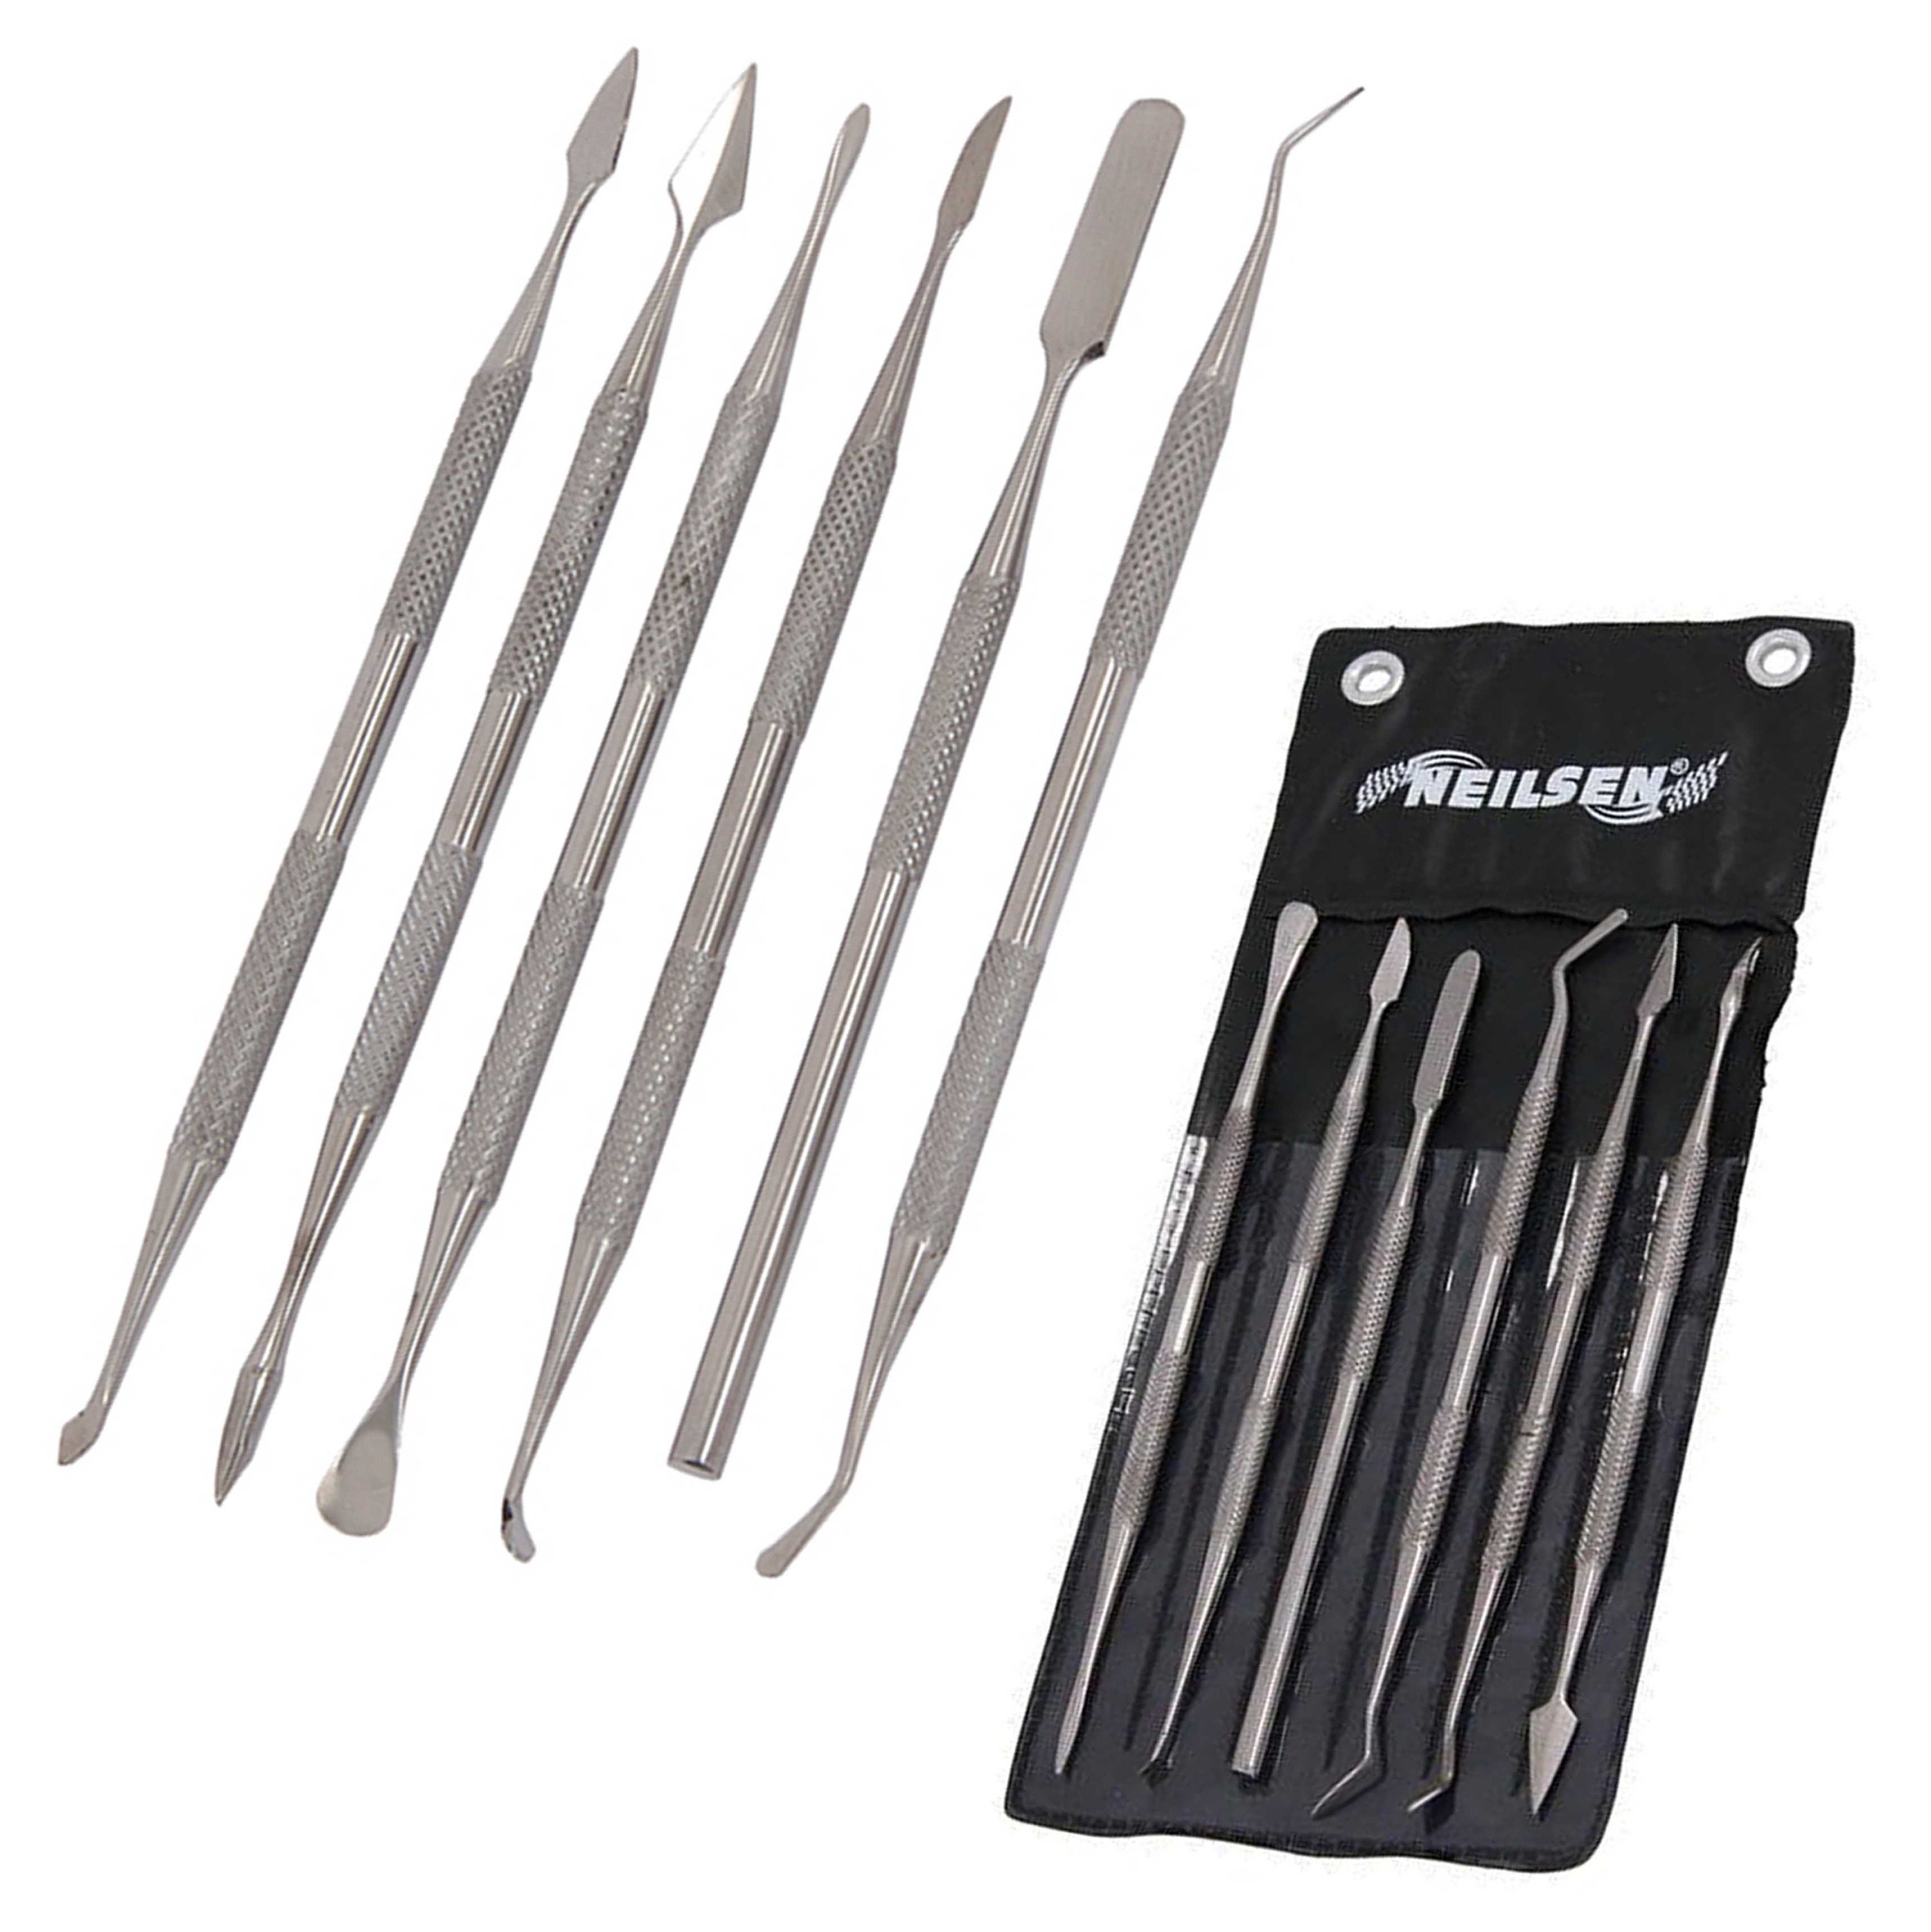 M00316 MOREZMORE 6 Steel Clay Wax Carver Carving Tools Set B Chisel Spatula A60 